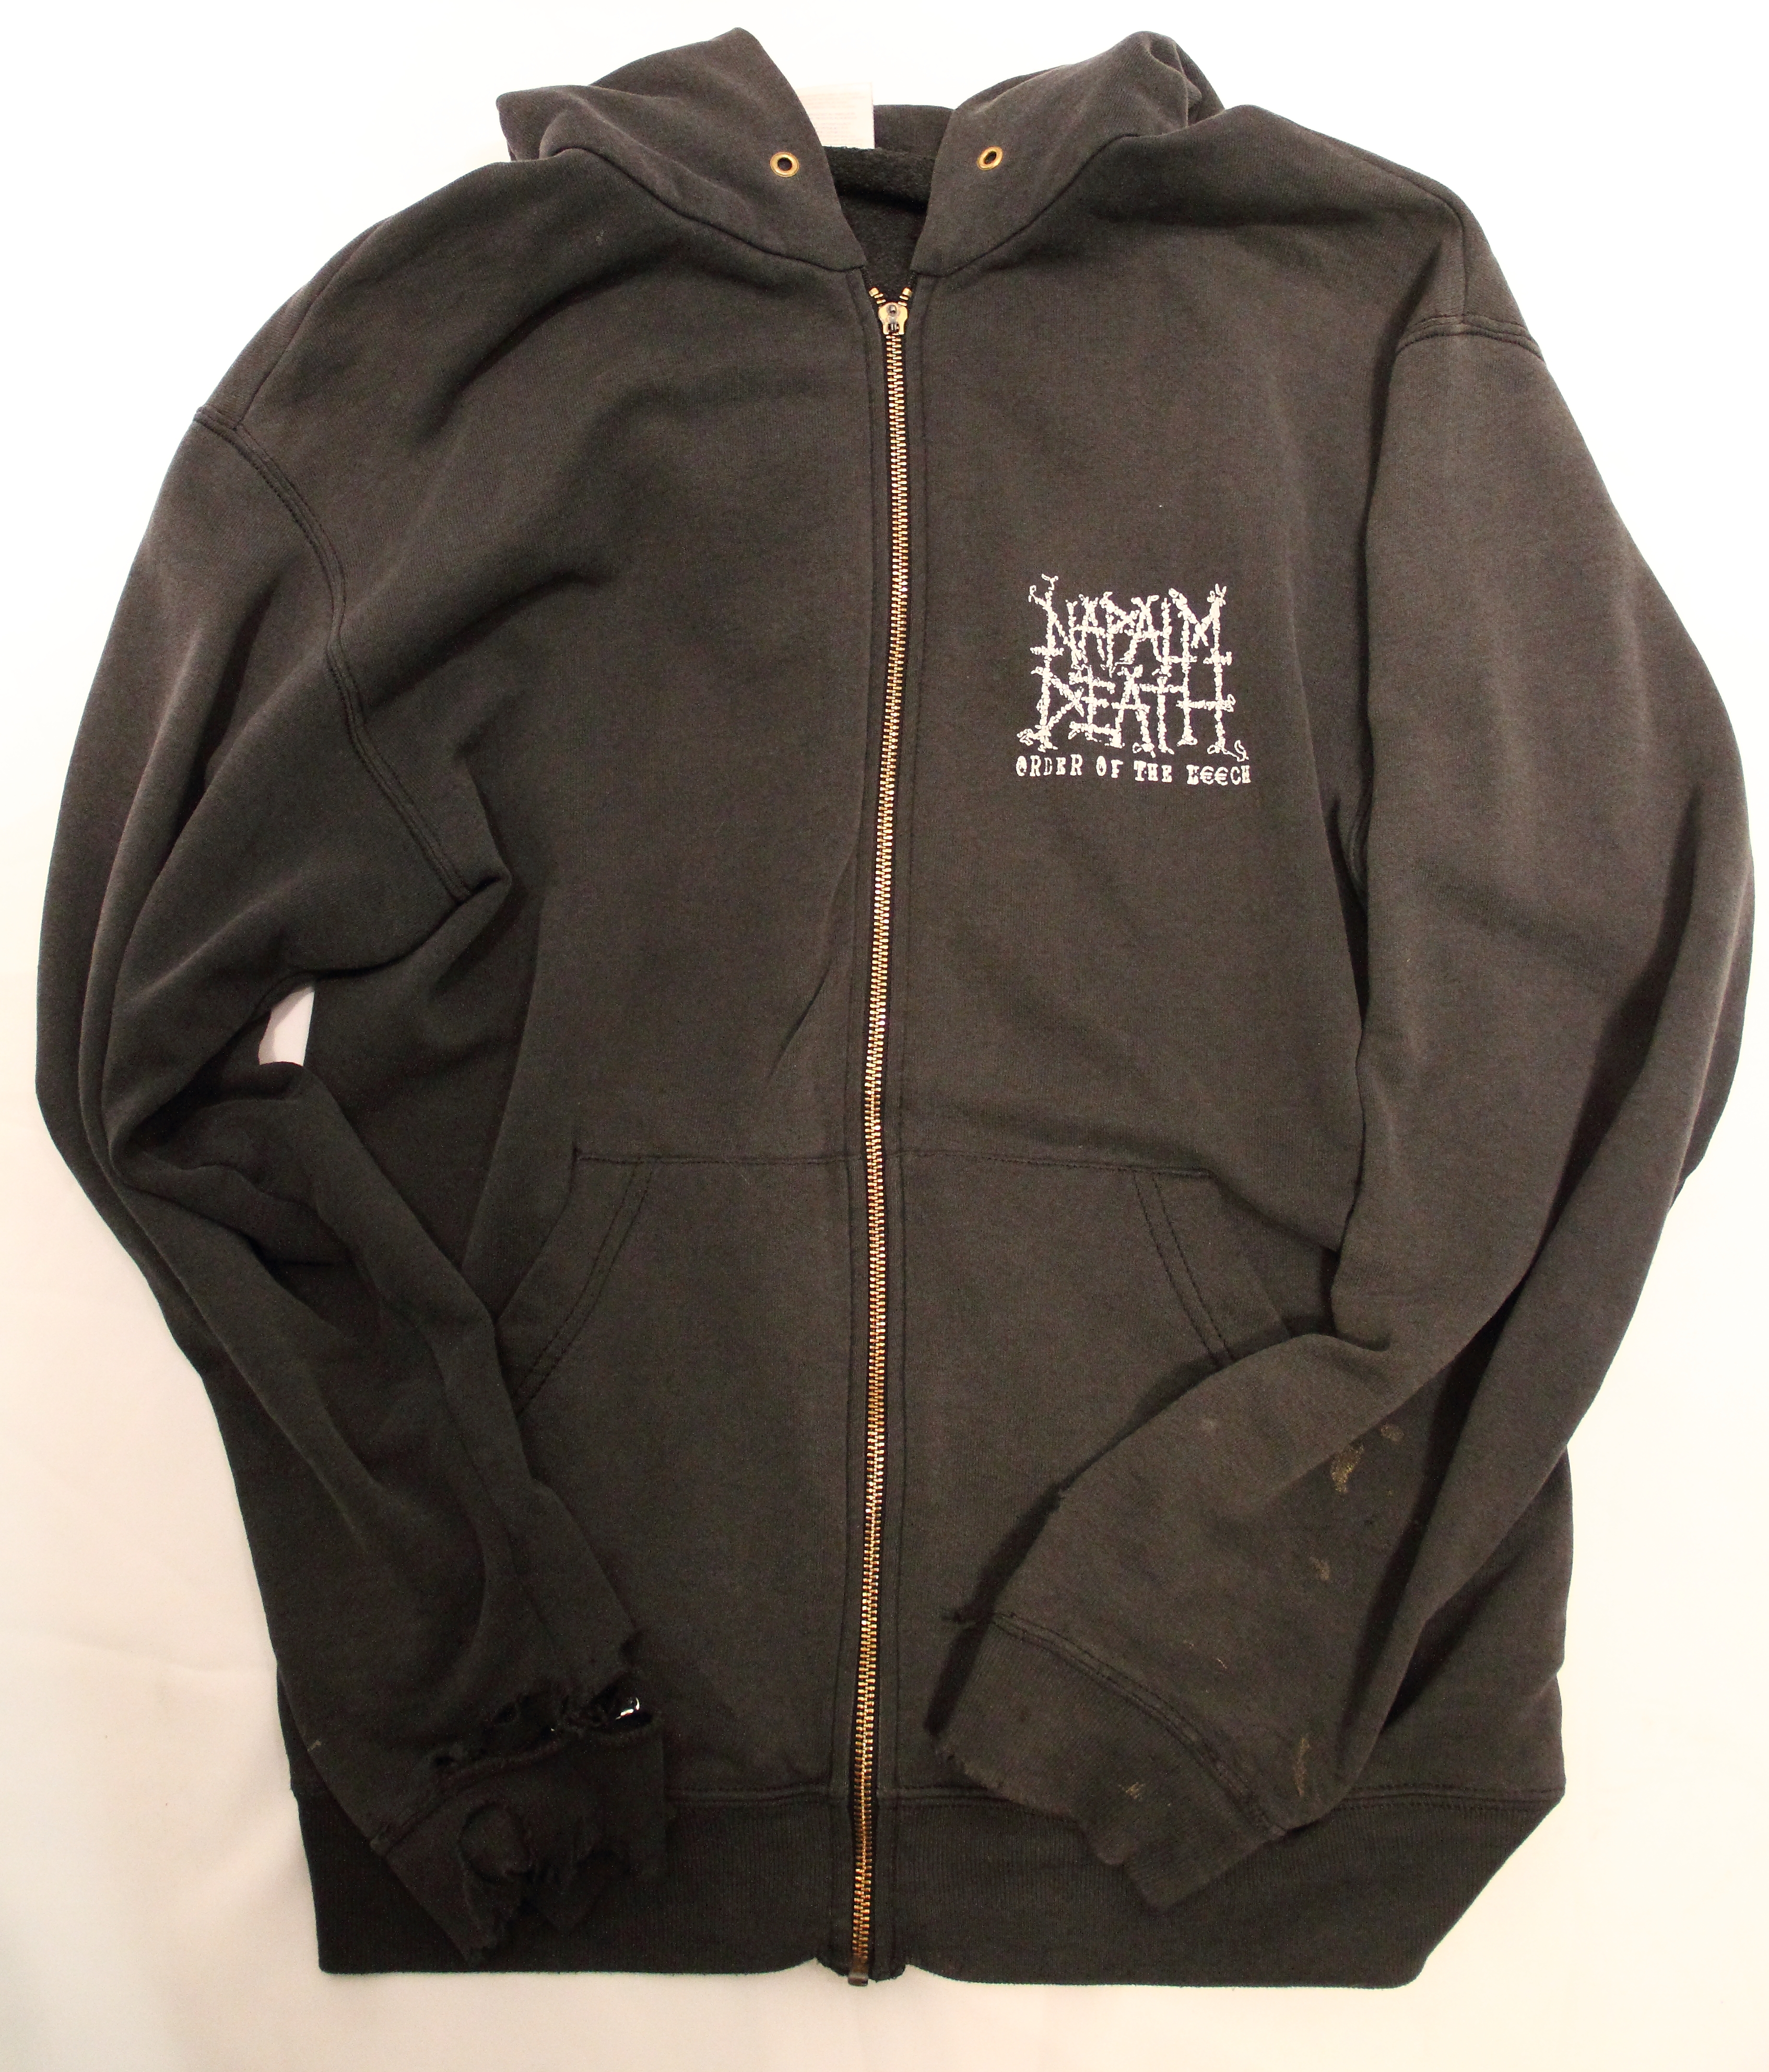 Home of Metal | Napalm Death – Order of the Leech – Hoodie